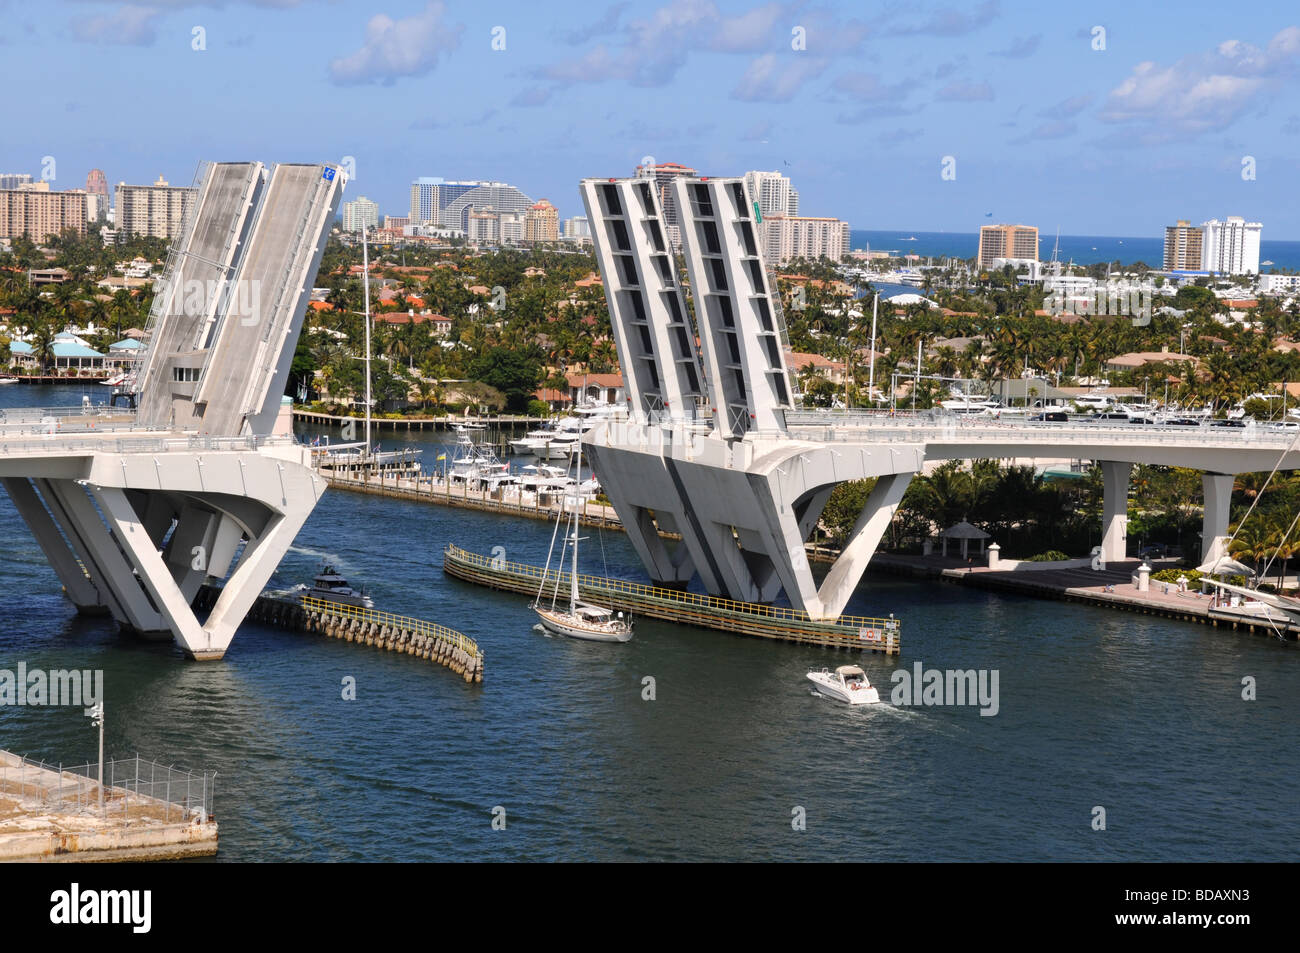 Ft Lauderdale bridge lifting to allow ships get across Stock Photo